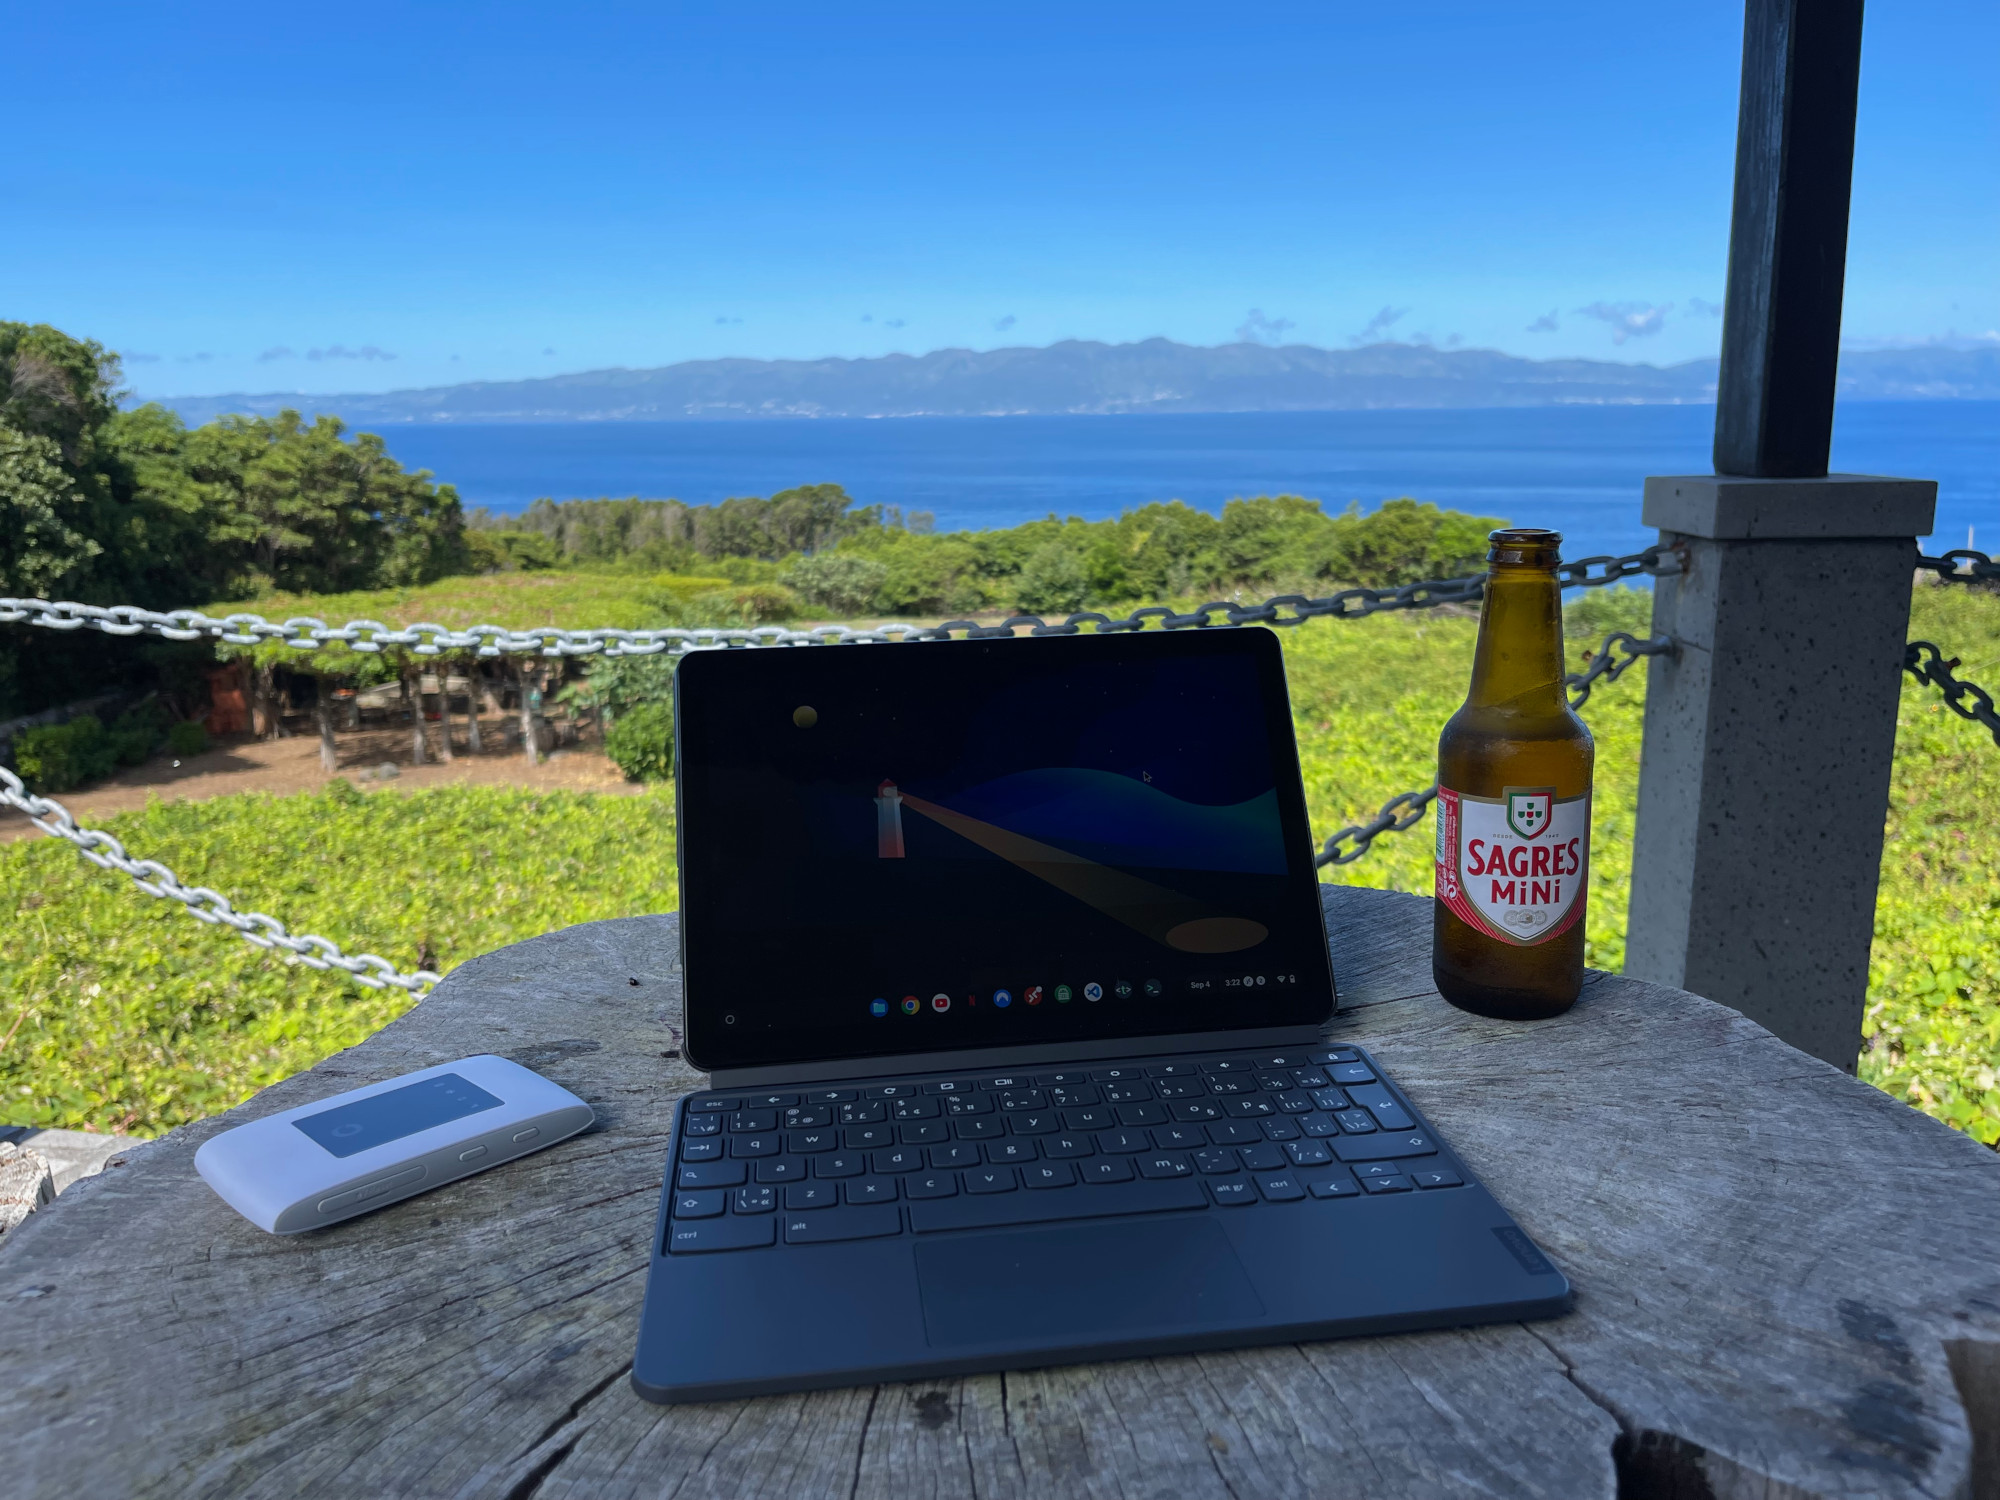 Lenovo Chromebook Duet 2-in-1, with a Vodafone LTE hotspot and a beverage